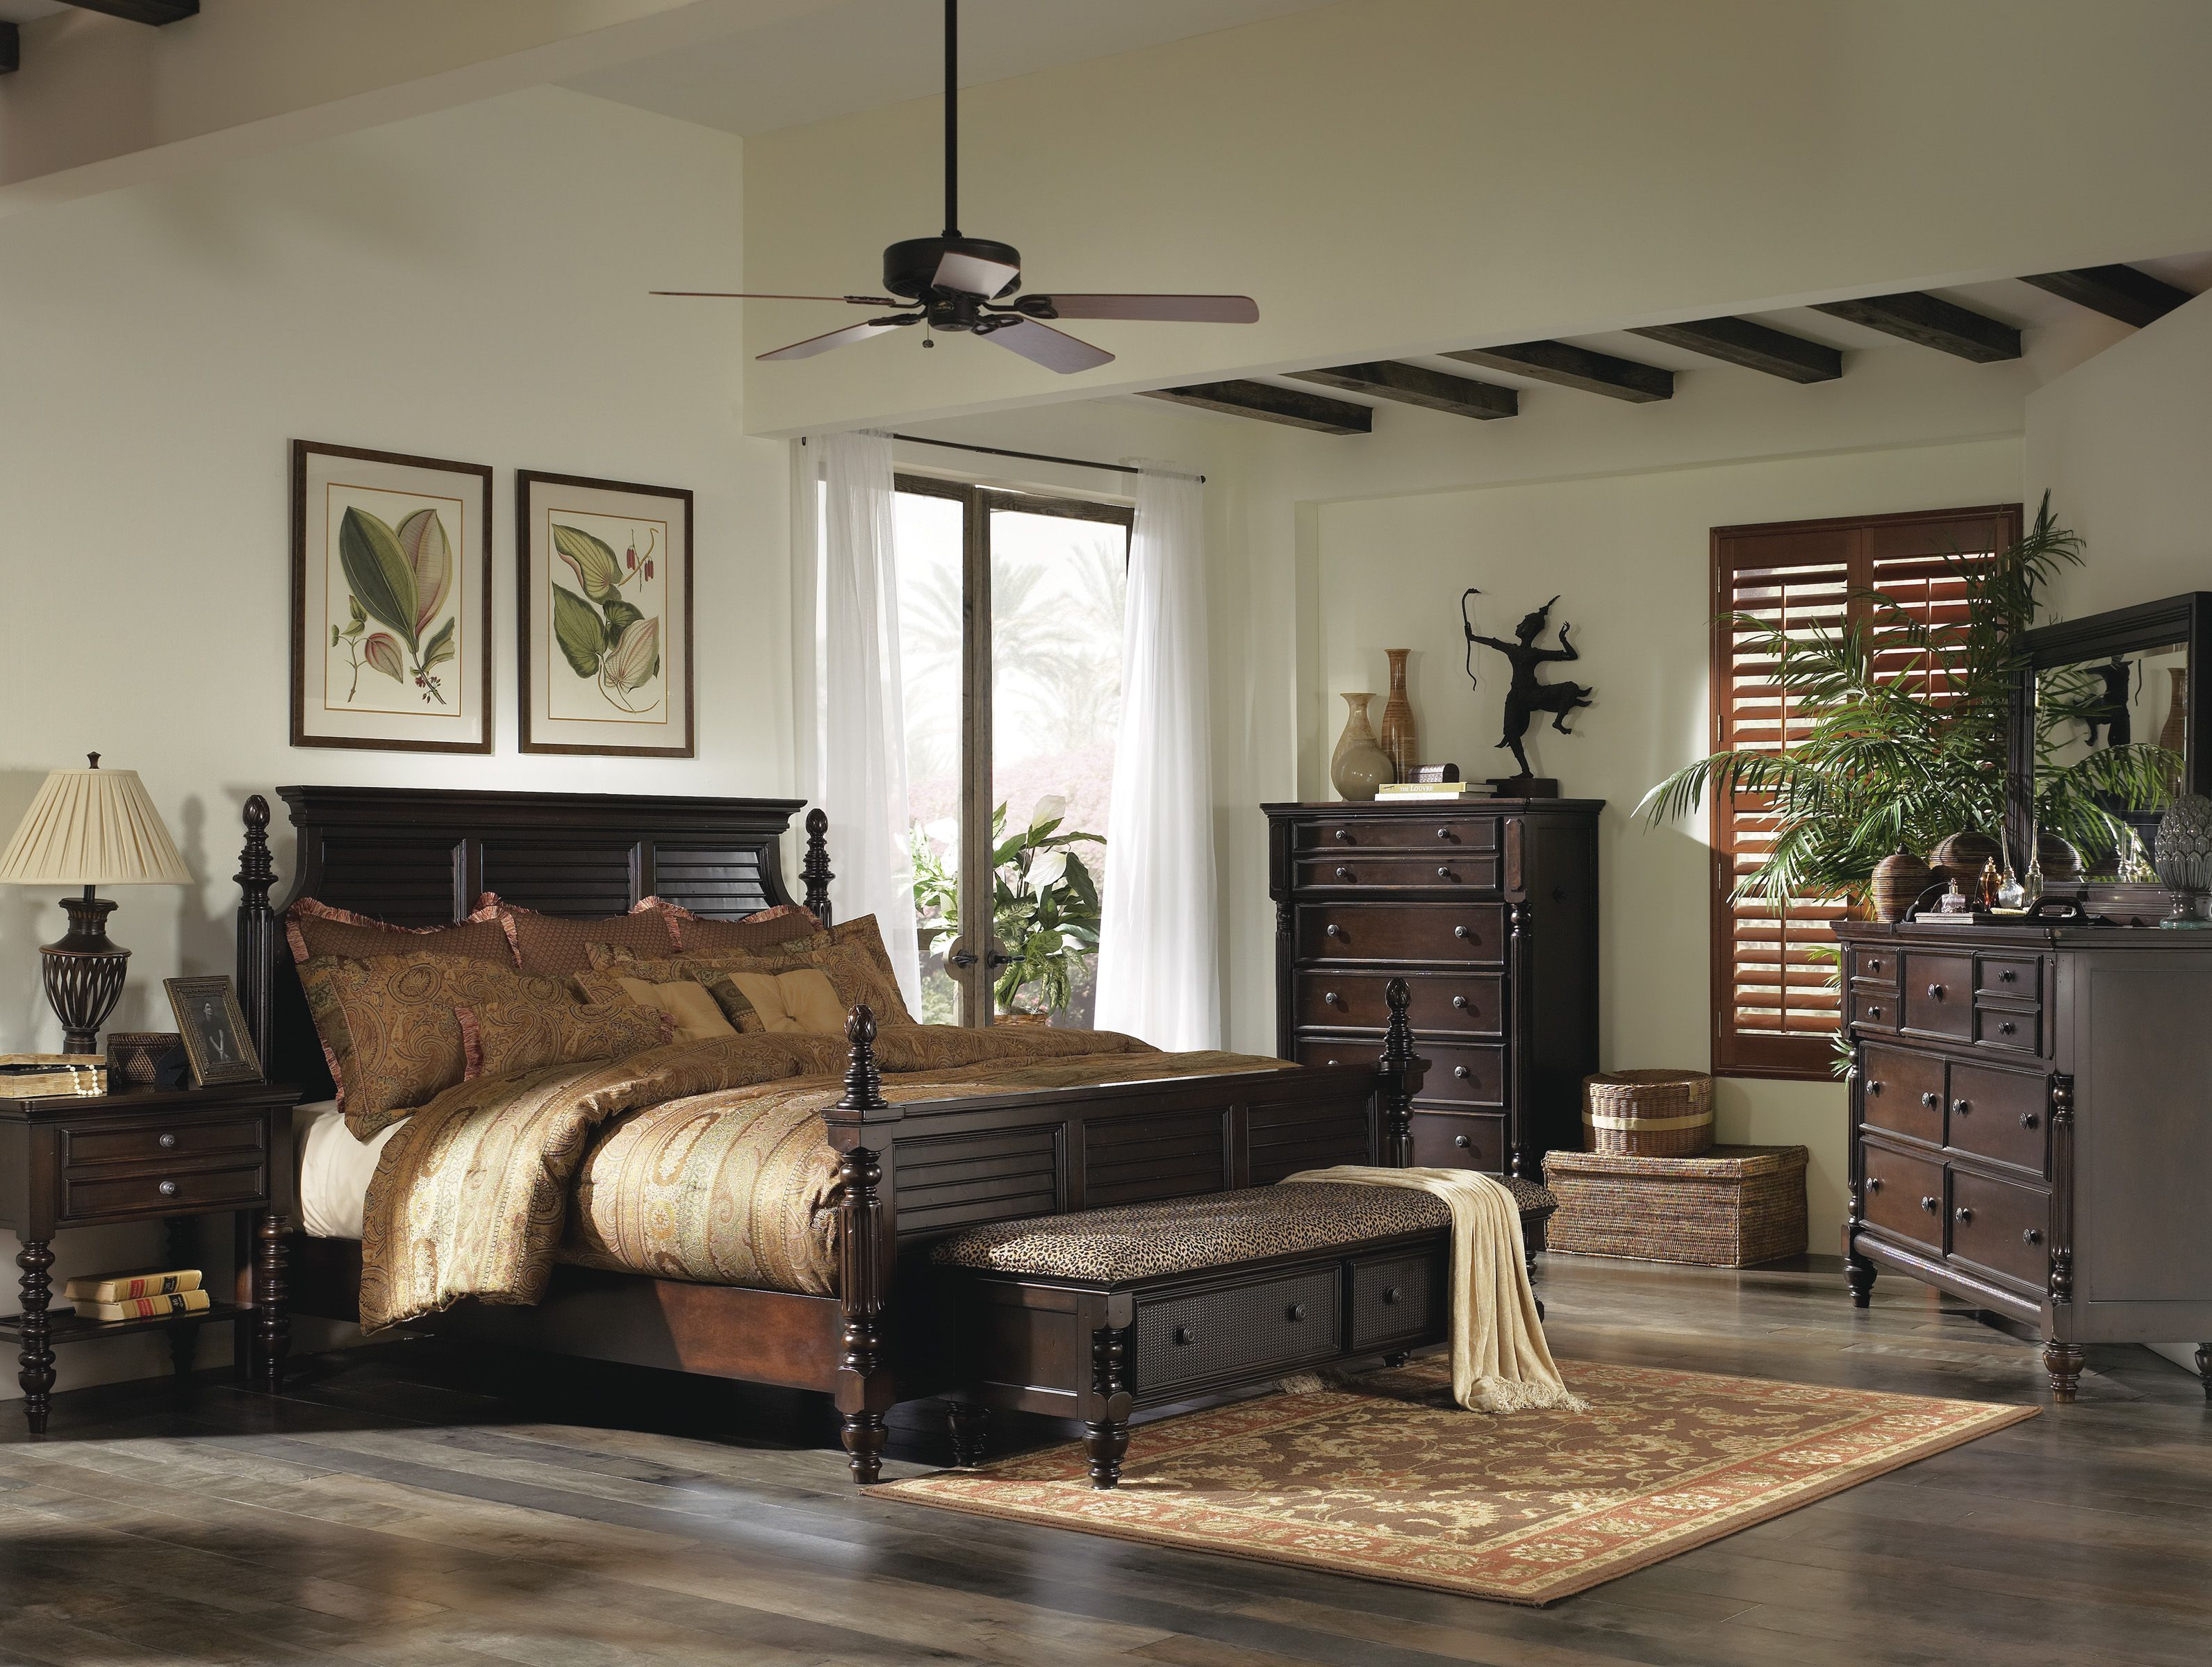 British Colonial Bedroom Furniture For The Bedroom British with dimensions 3184 X 2400